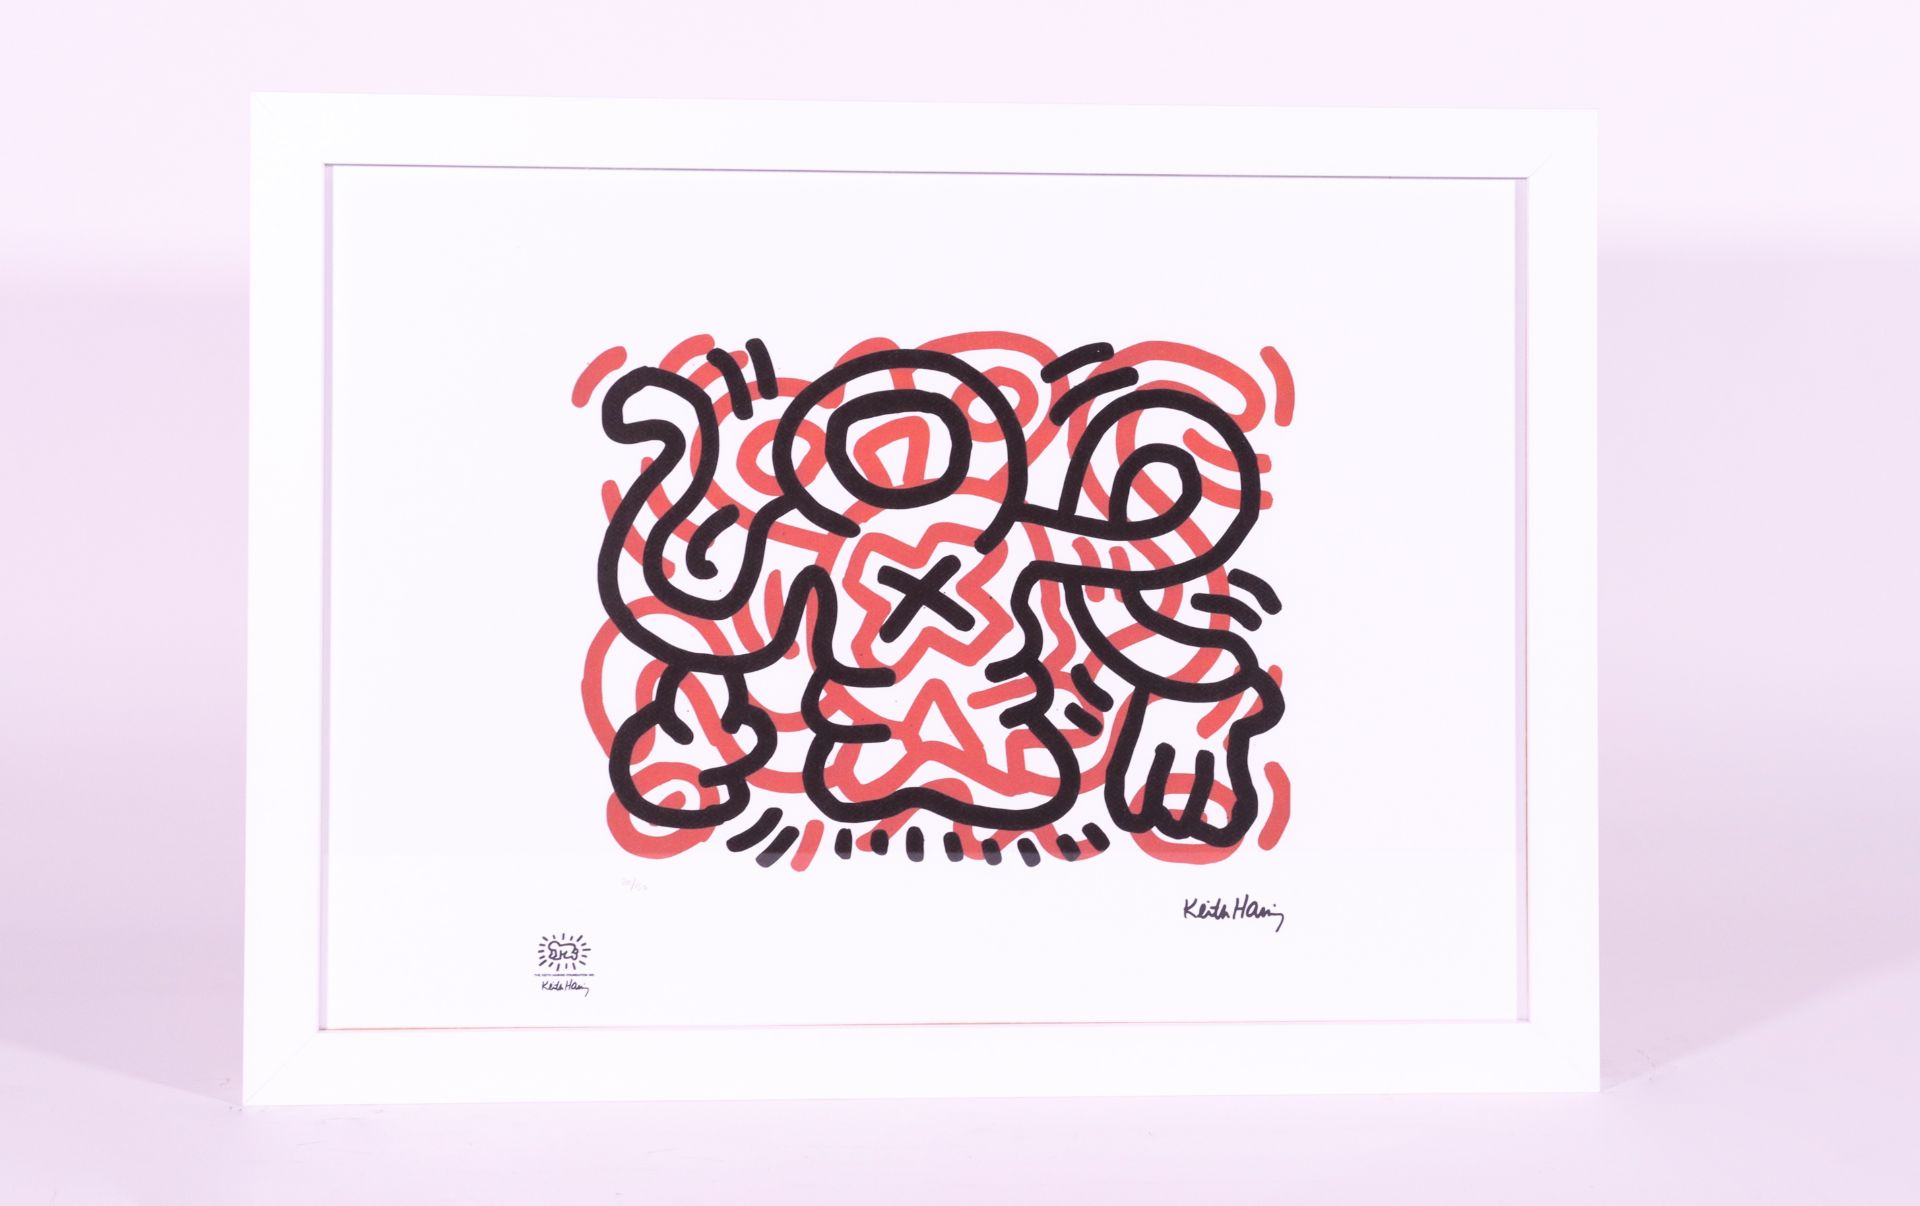 Keith HARING (After) (1958-1990)